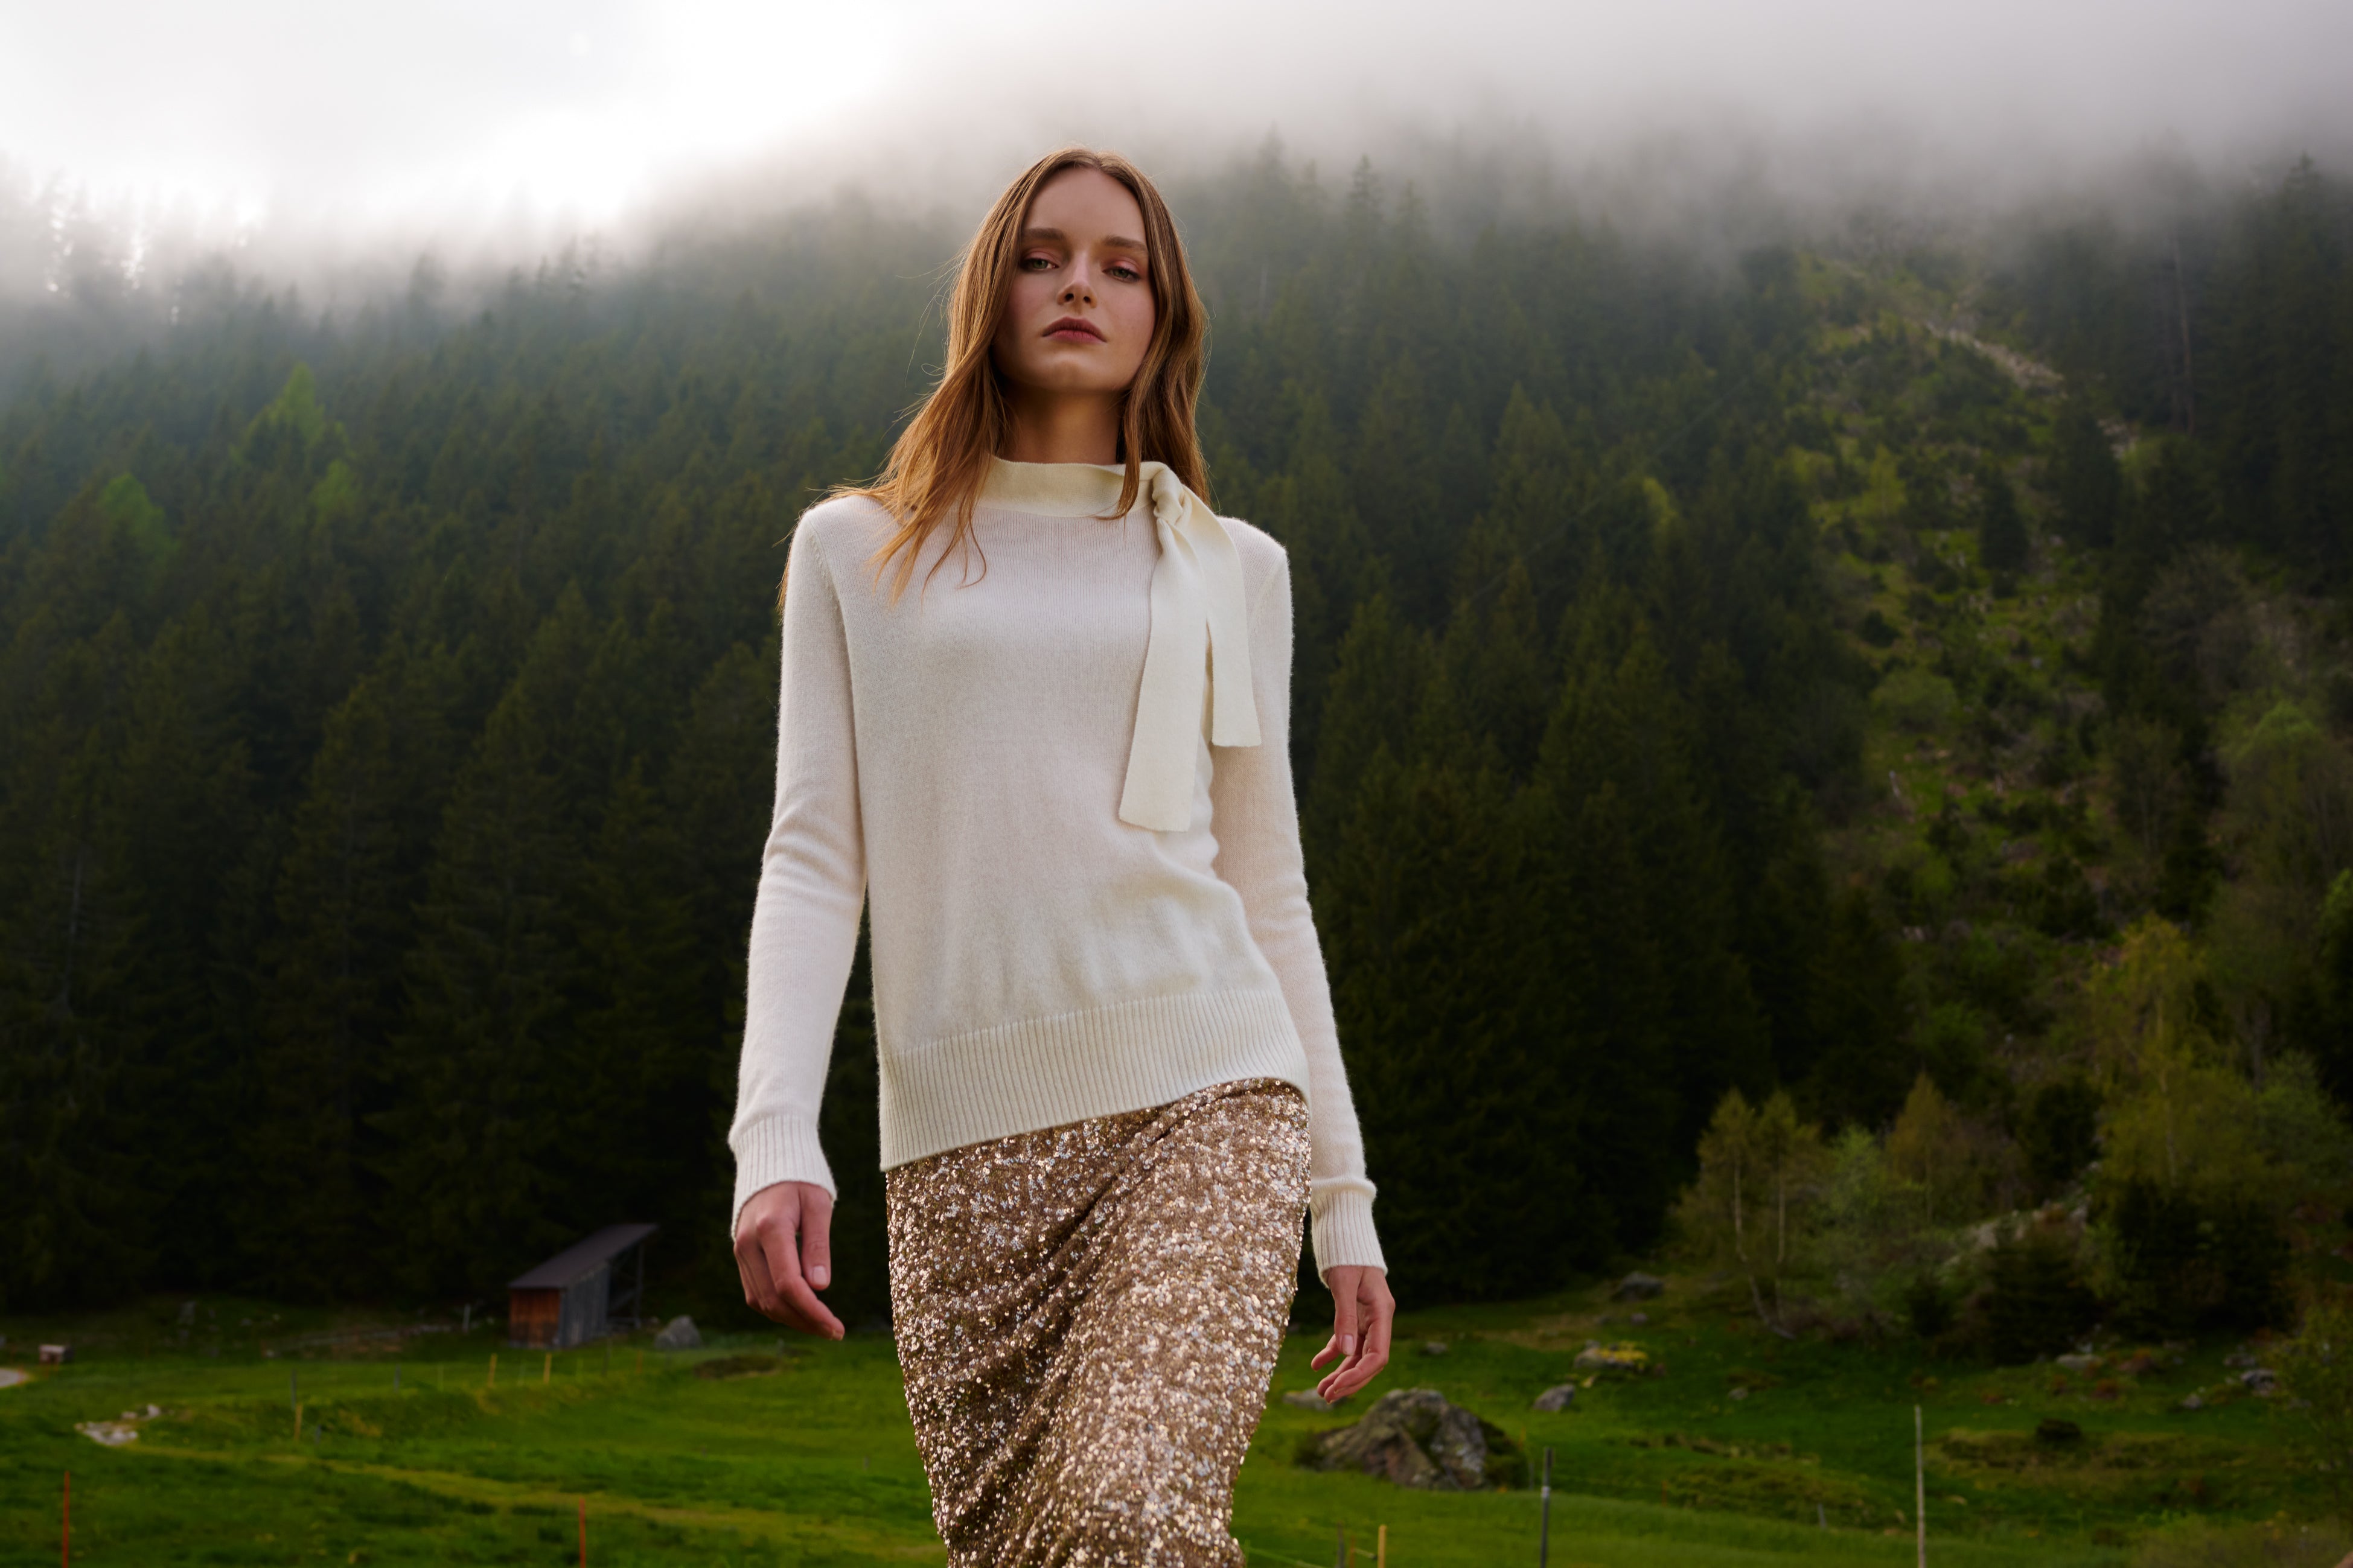 Elegant and soft cashmere fashion for indoors and outdoors and always wrapped up warm